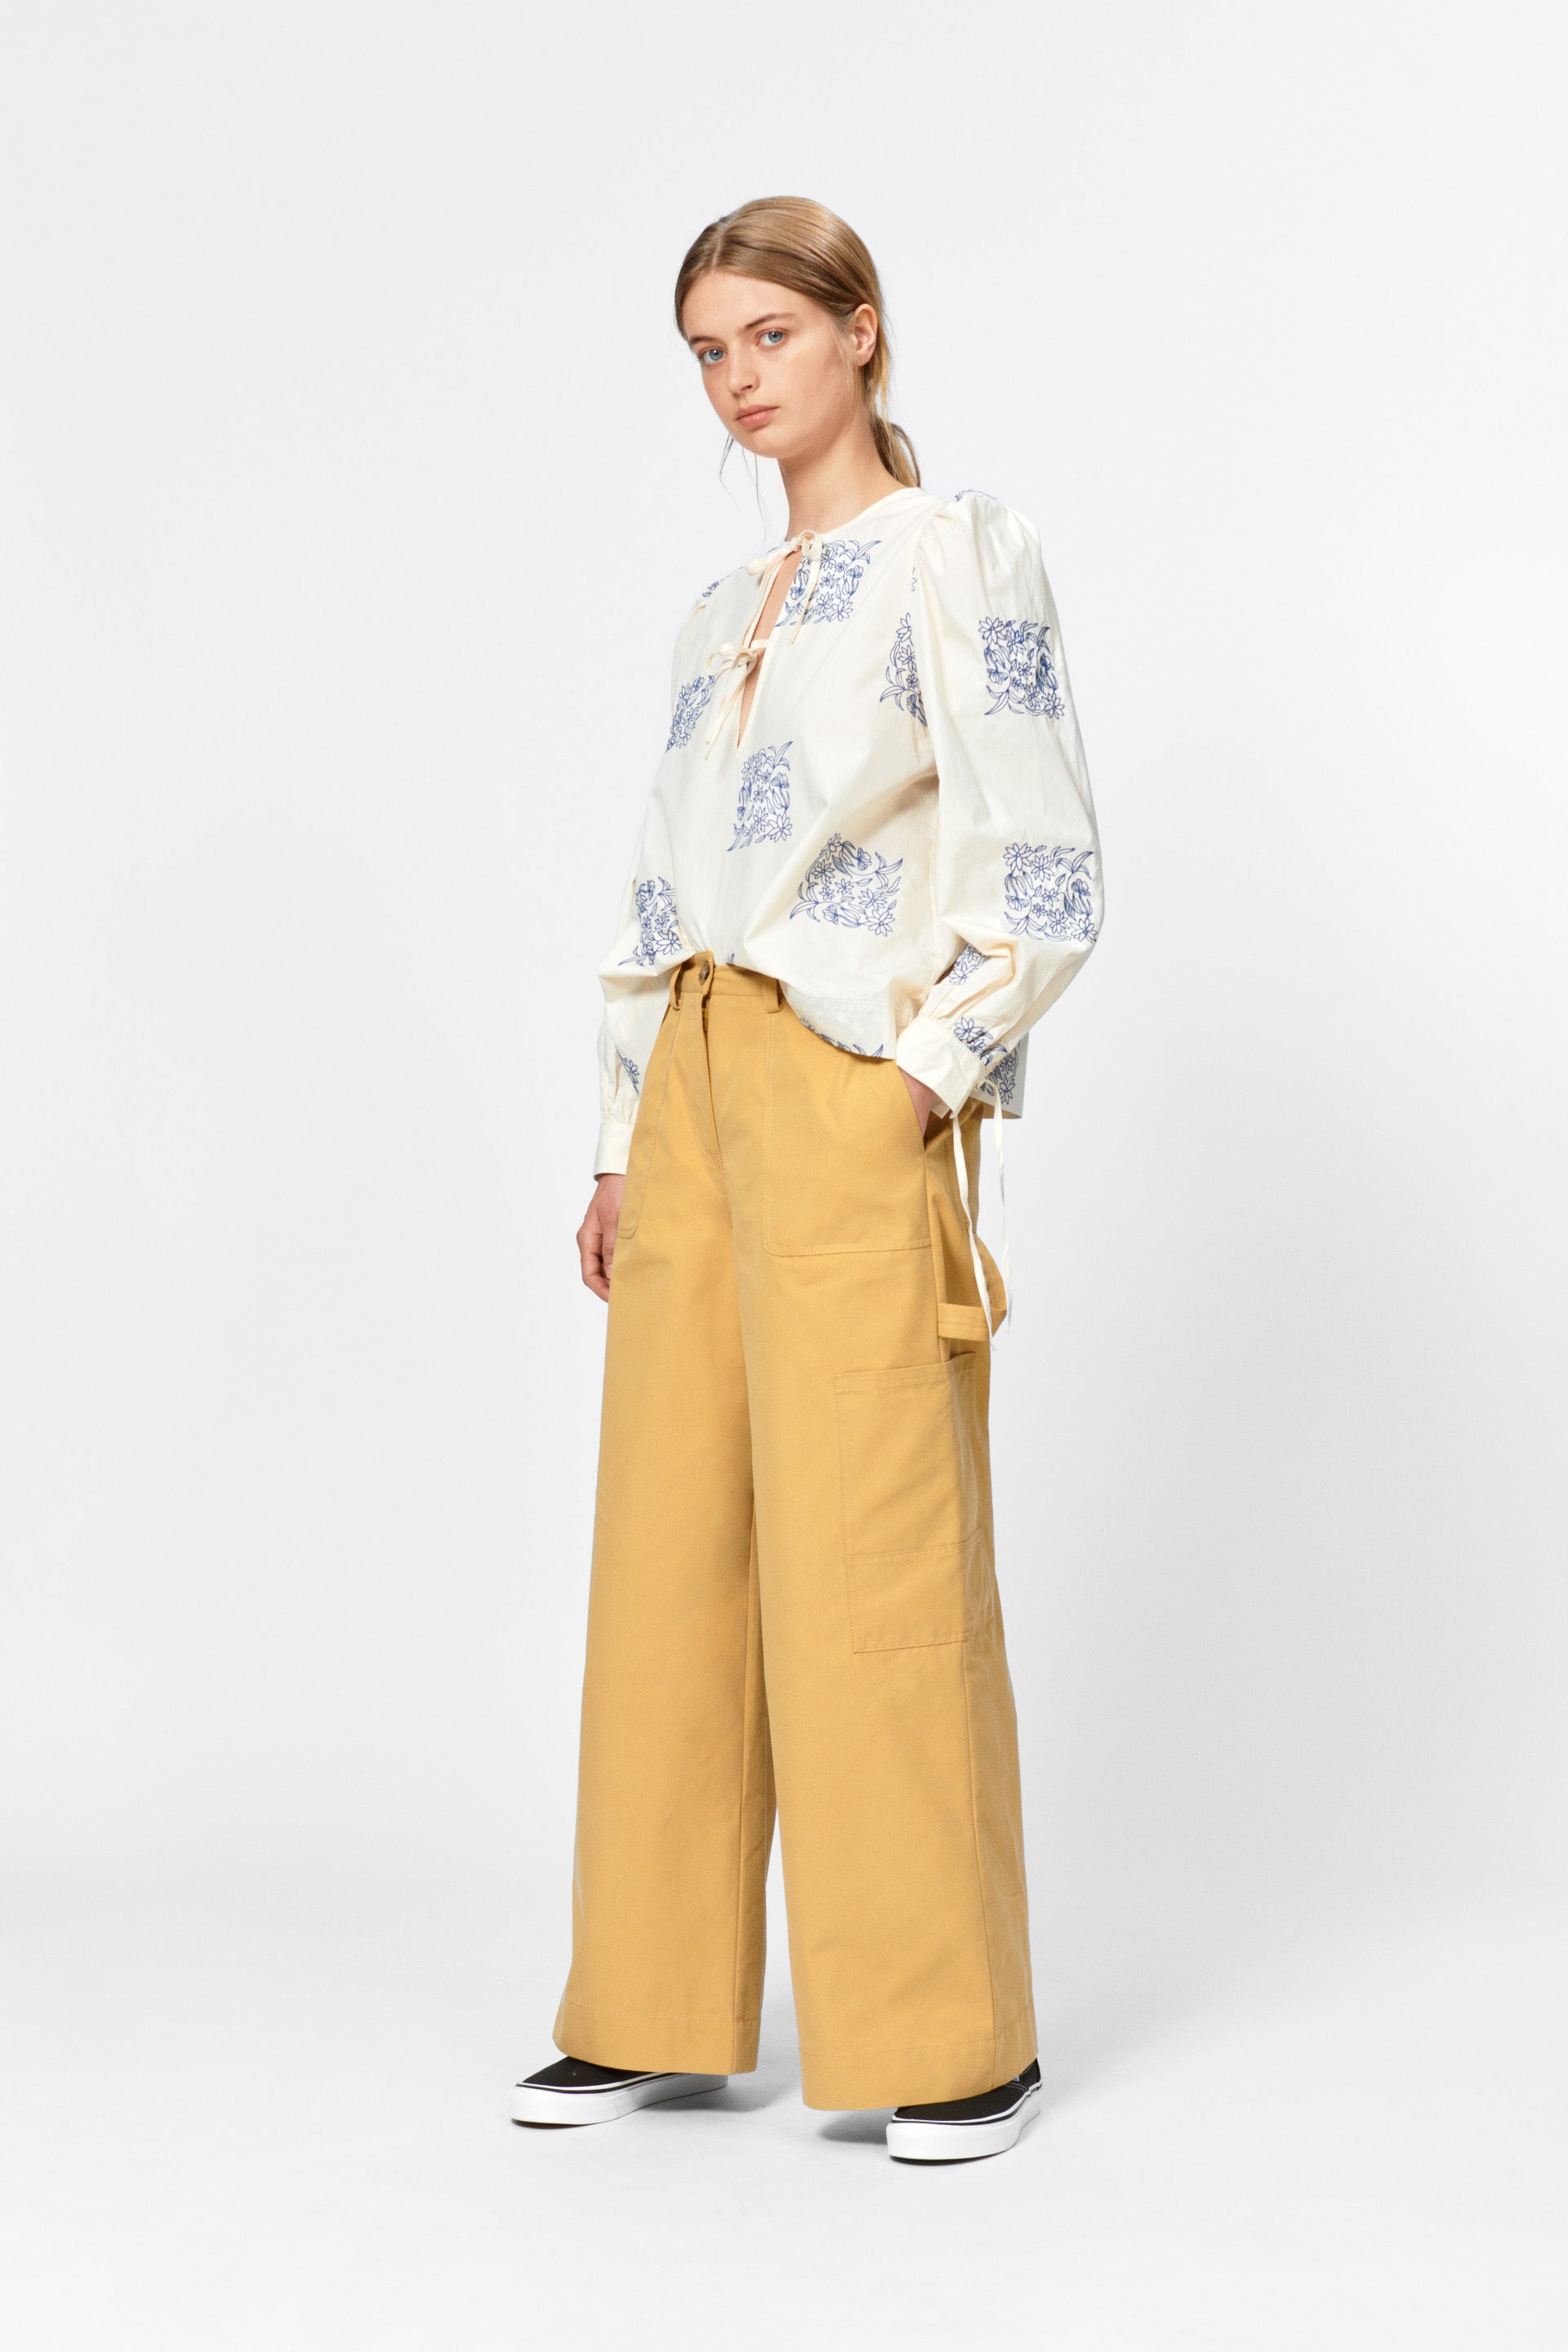 nué notes Hartwell Blouse SHIRTS 013 Birch